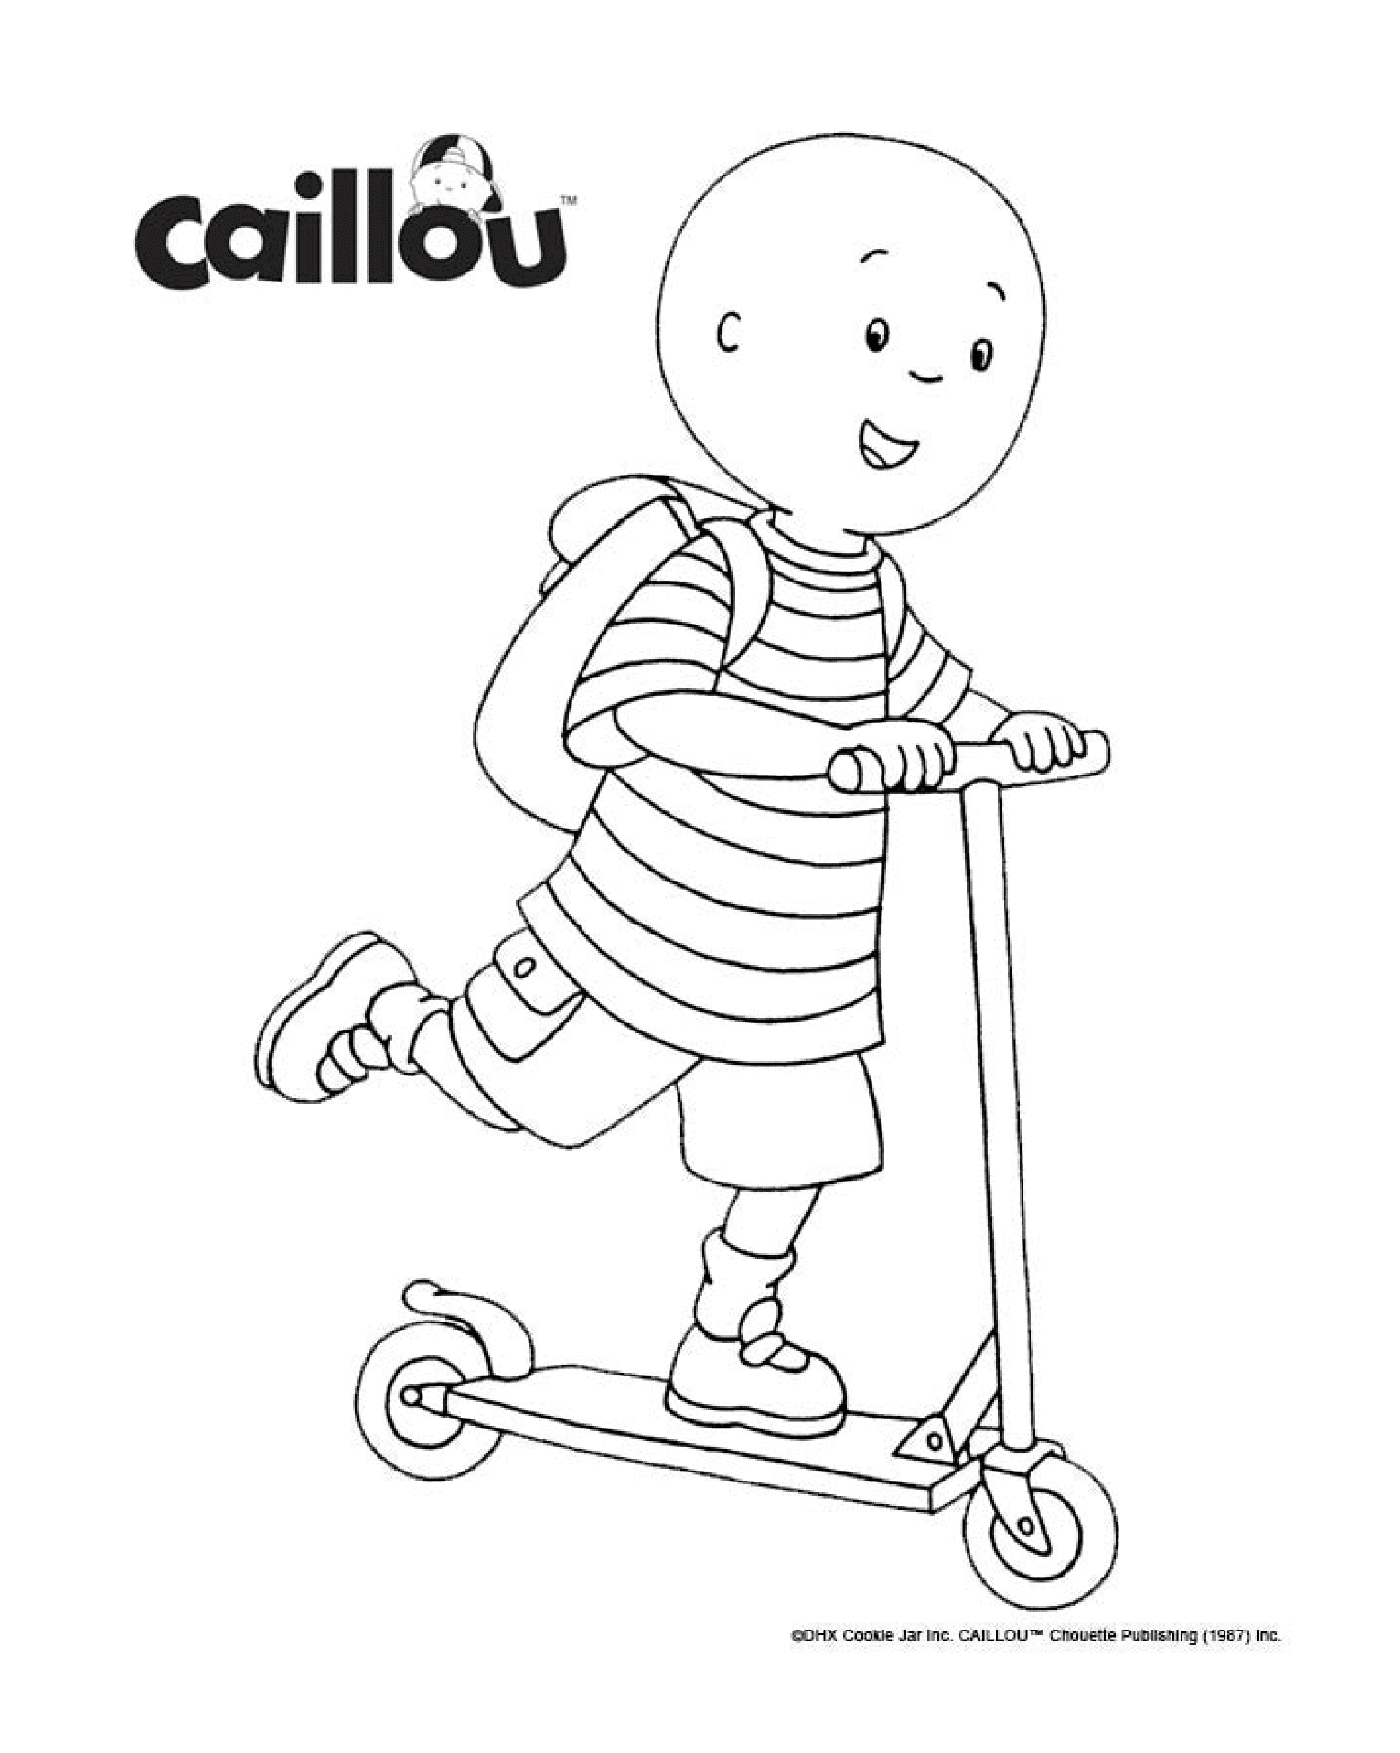  Caillou with an electric scooter 